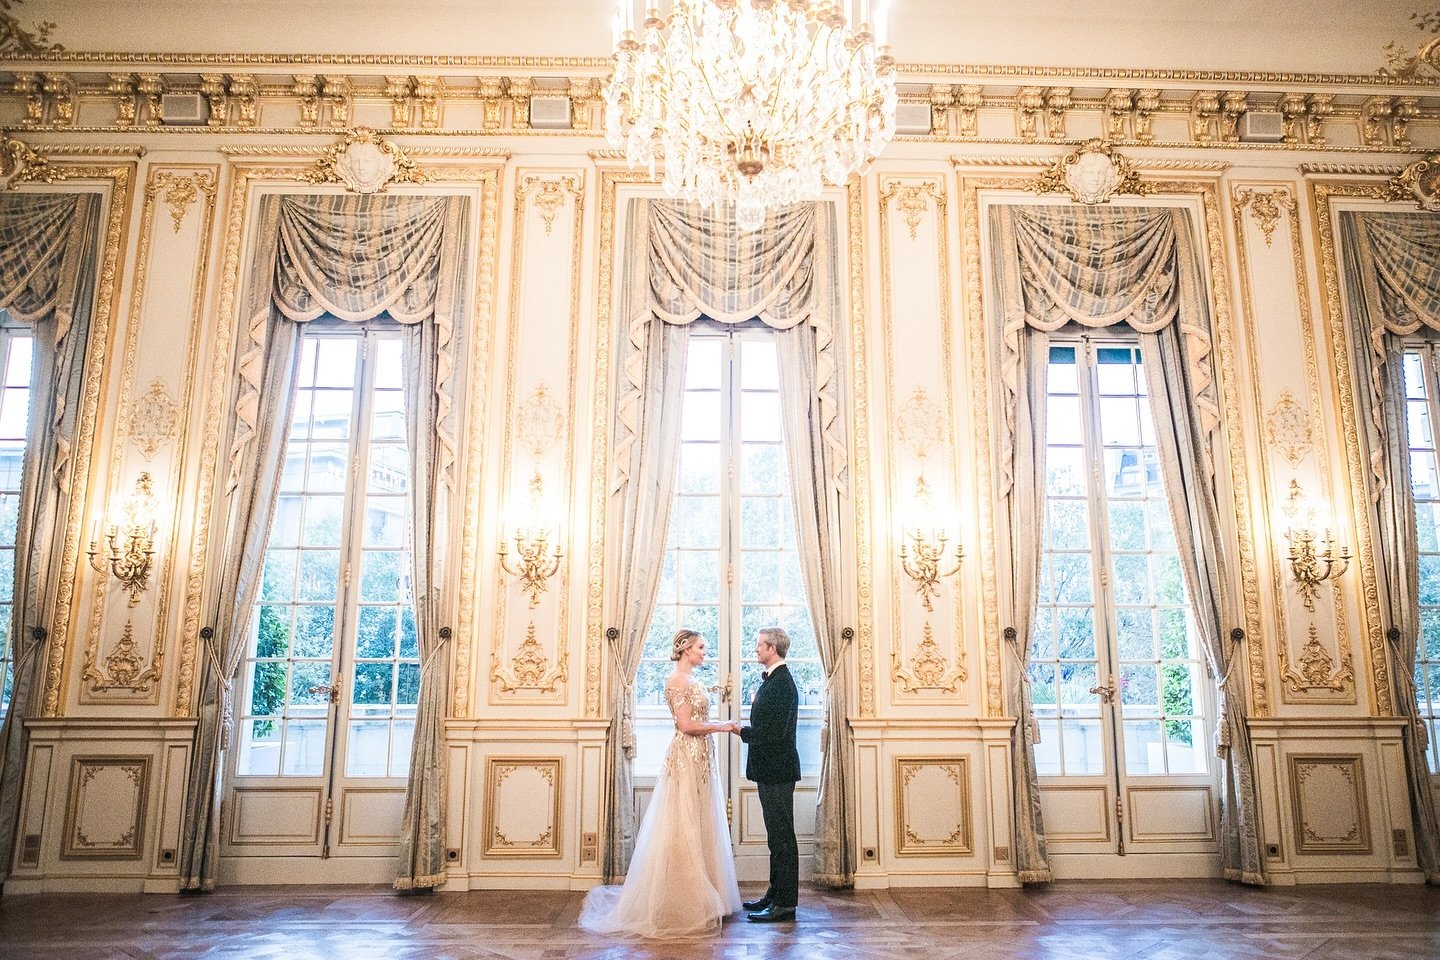 The @shangrilaparis is one of my favorite hotels &amp; wedding venues in Paris so where better for this fabulous vow renewal ceremony to take place! Full photo story coming soon!